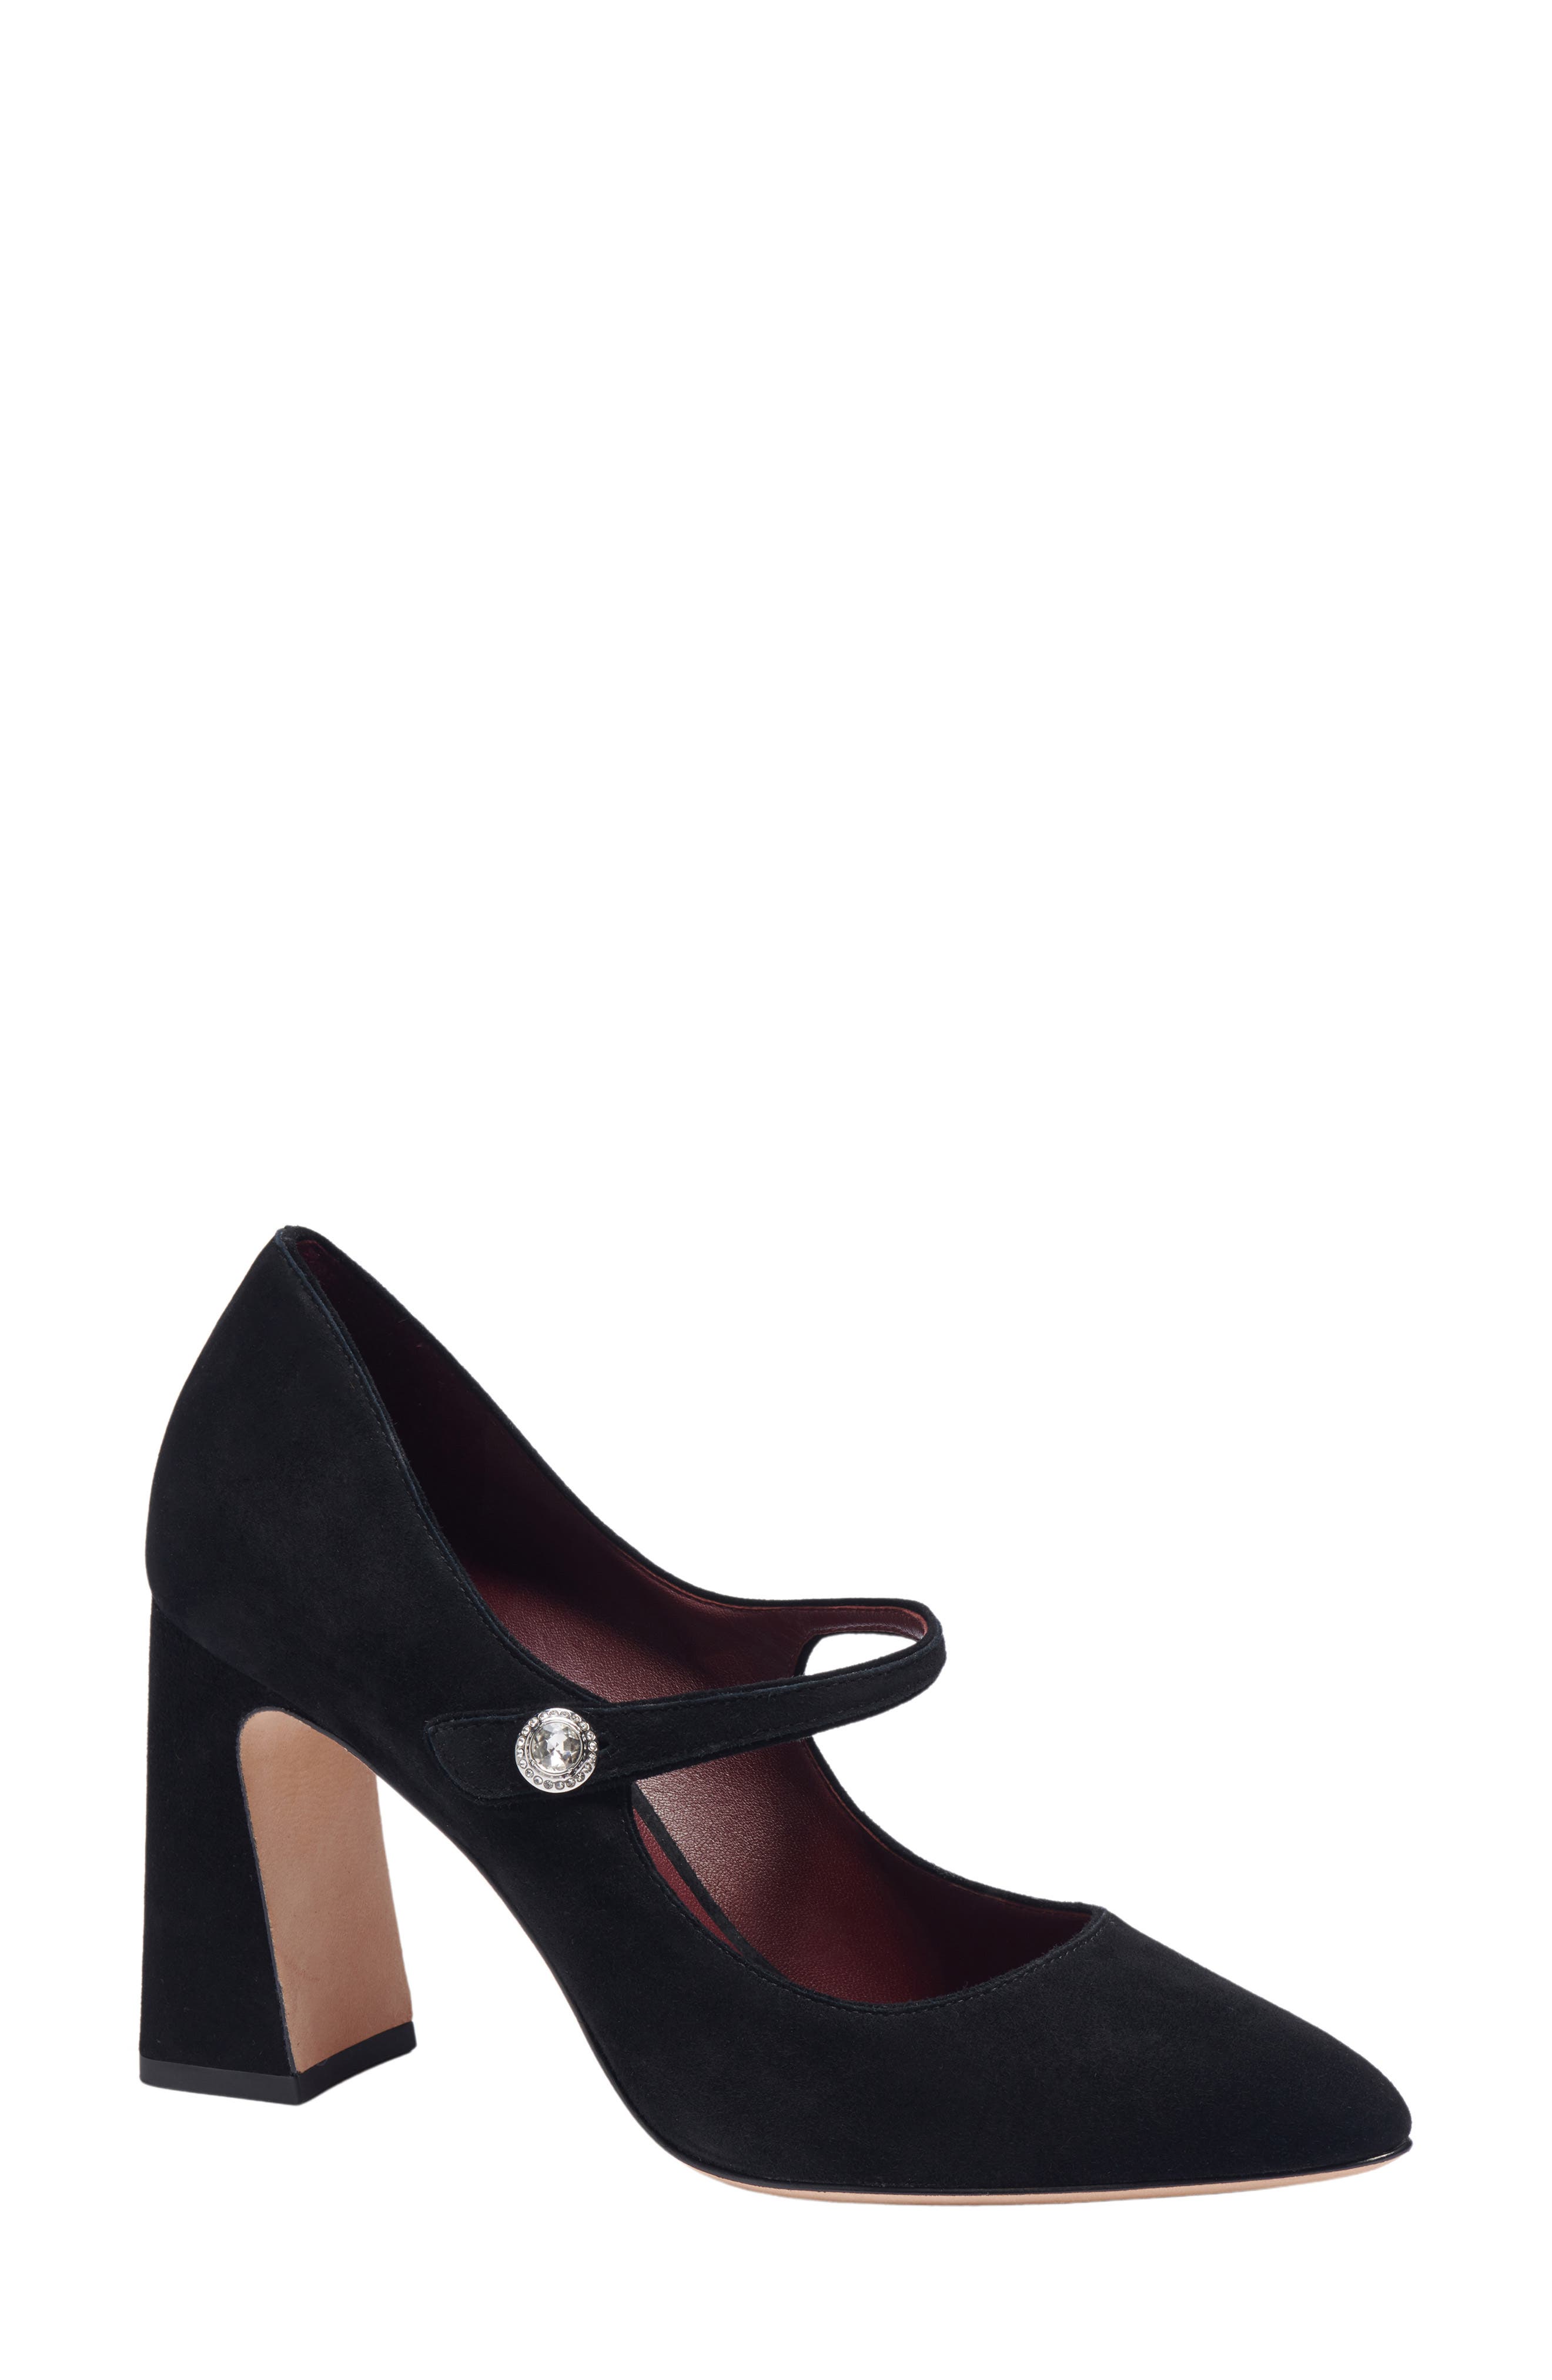 Shoes Pumps Mary Jane Pumps Pedro garcia Mary Jane Pumps black casual look 